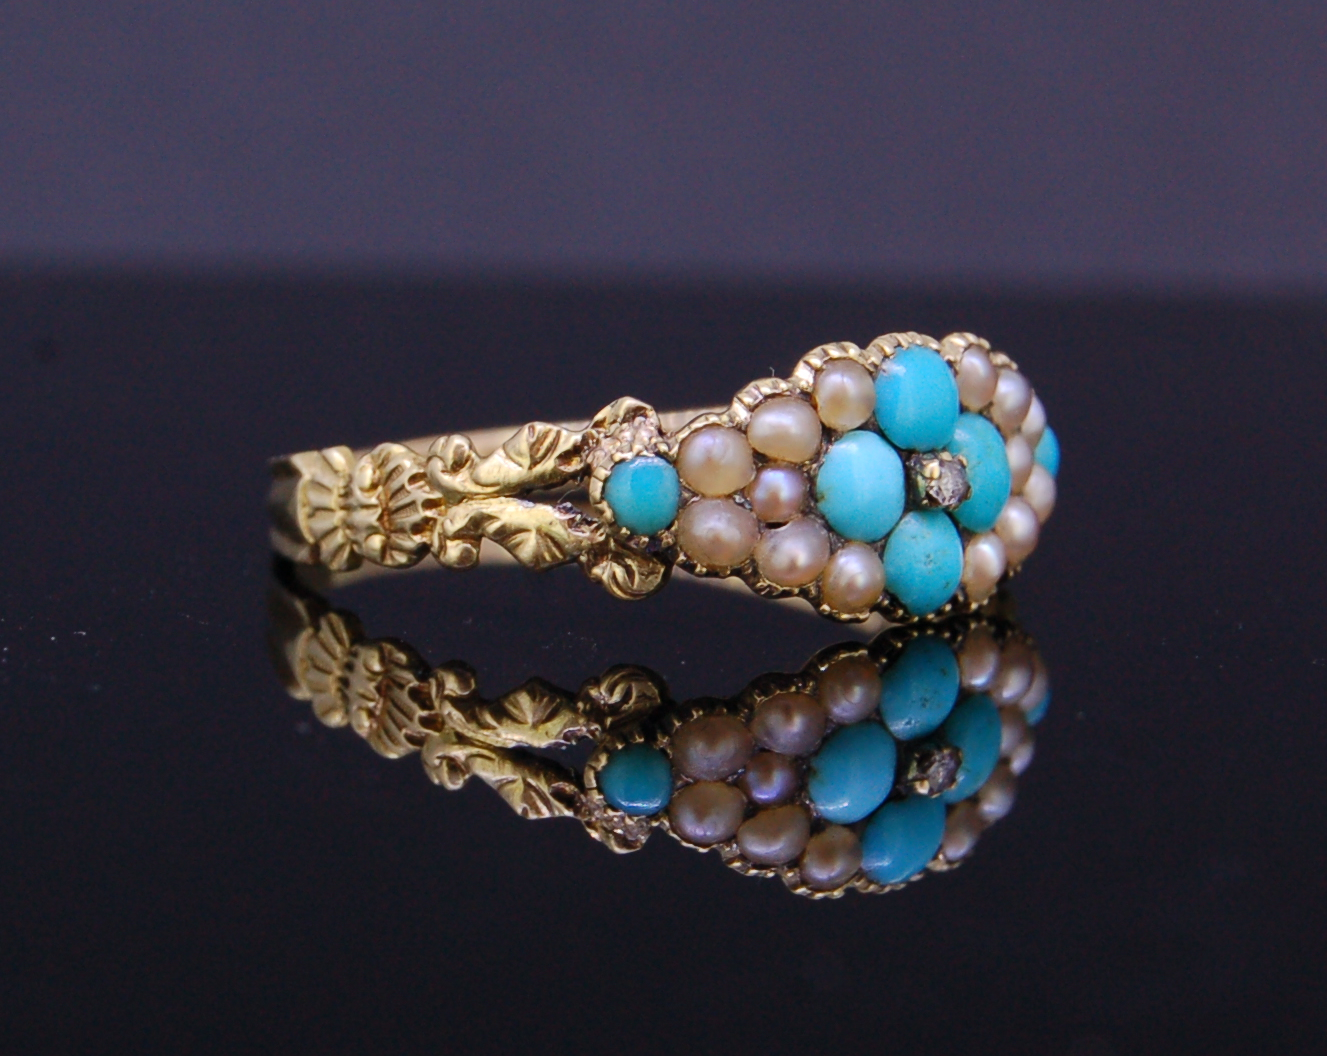 ANTIQUE TURQOISE AND PEARL RING - Image 2 of 3